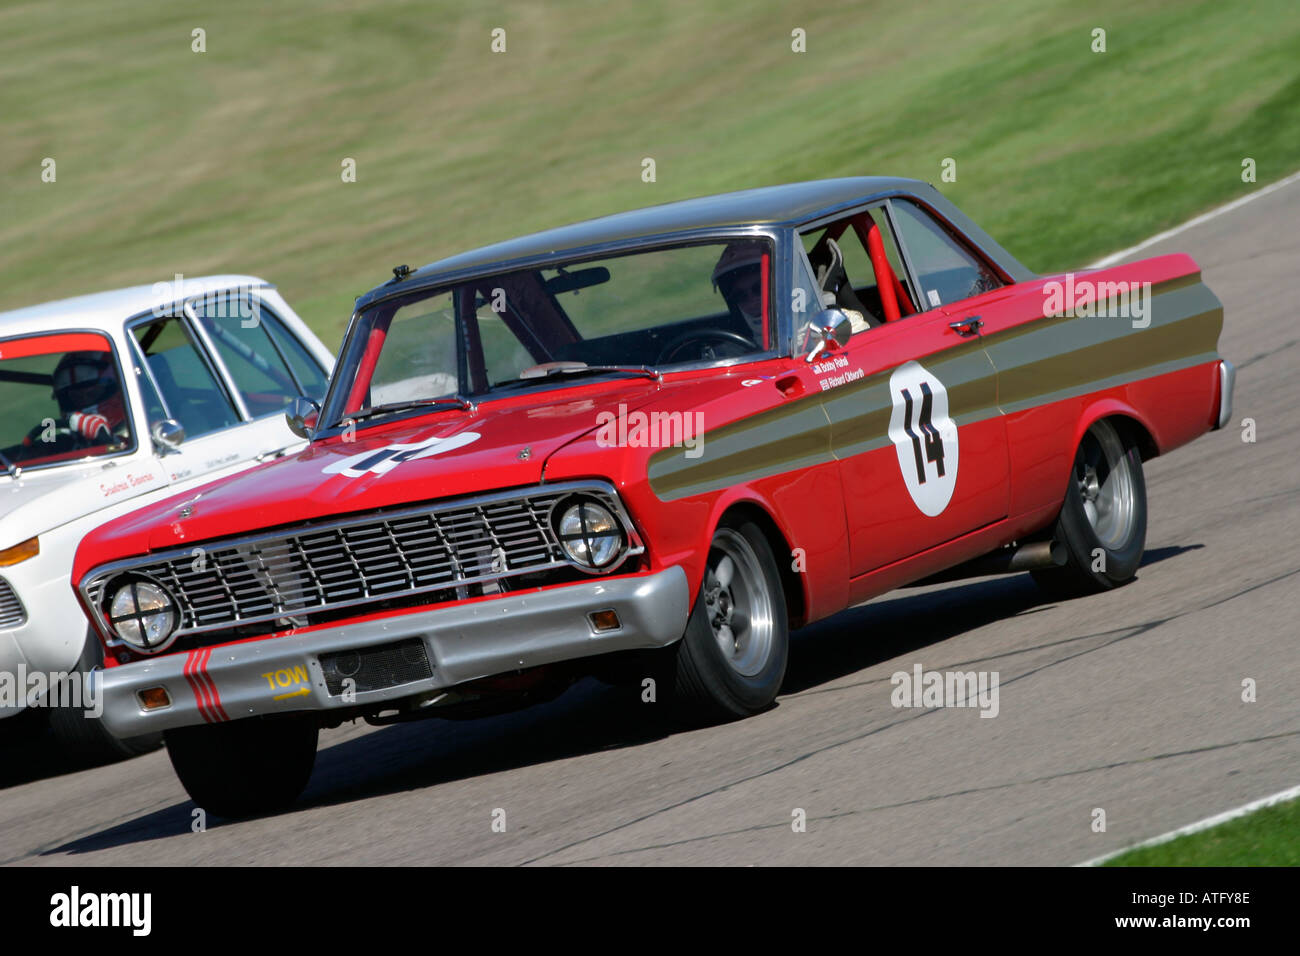 Ford falcon sprint uk #7